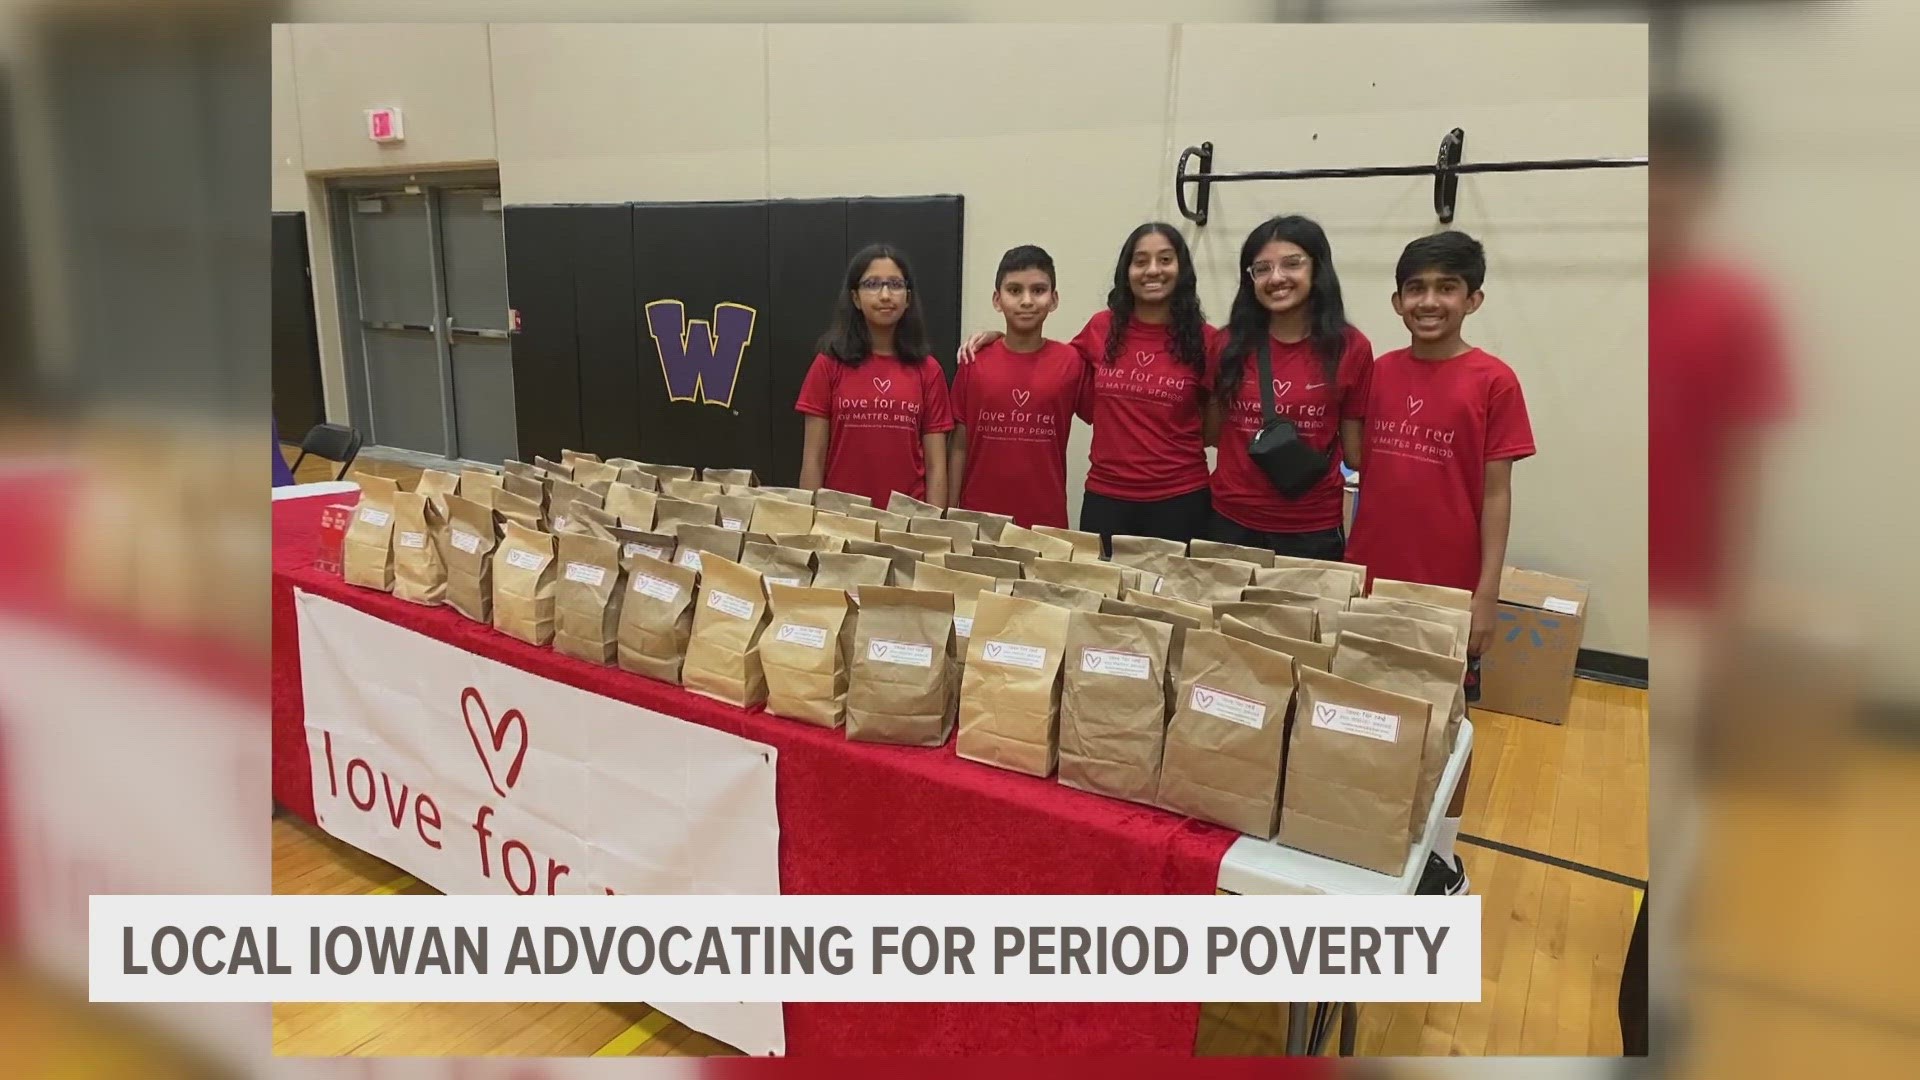 Maanya Pandey began the nonprofit Love For Red to help alleviate disparities in accessing menstrual products.